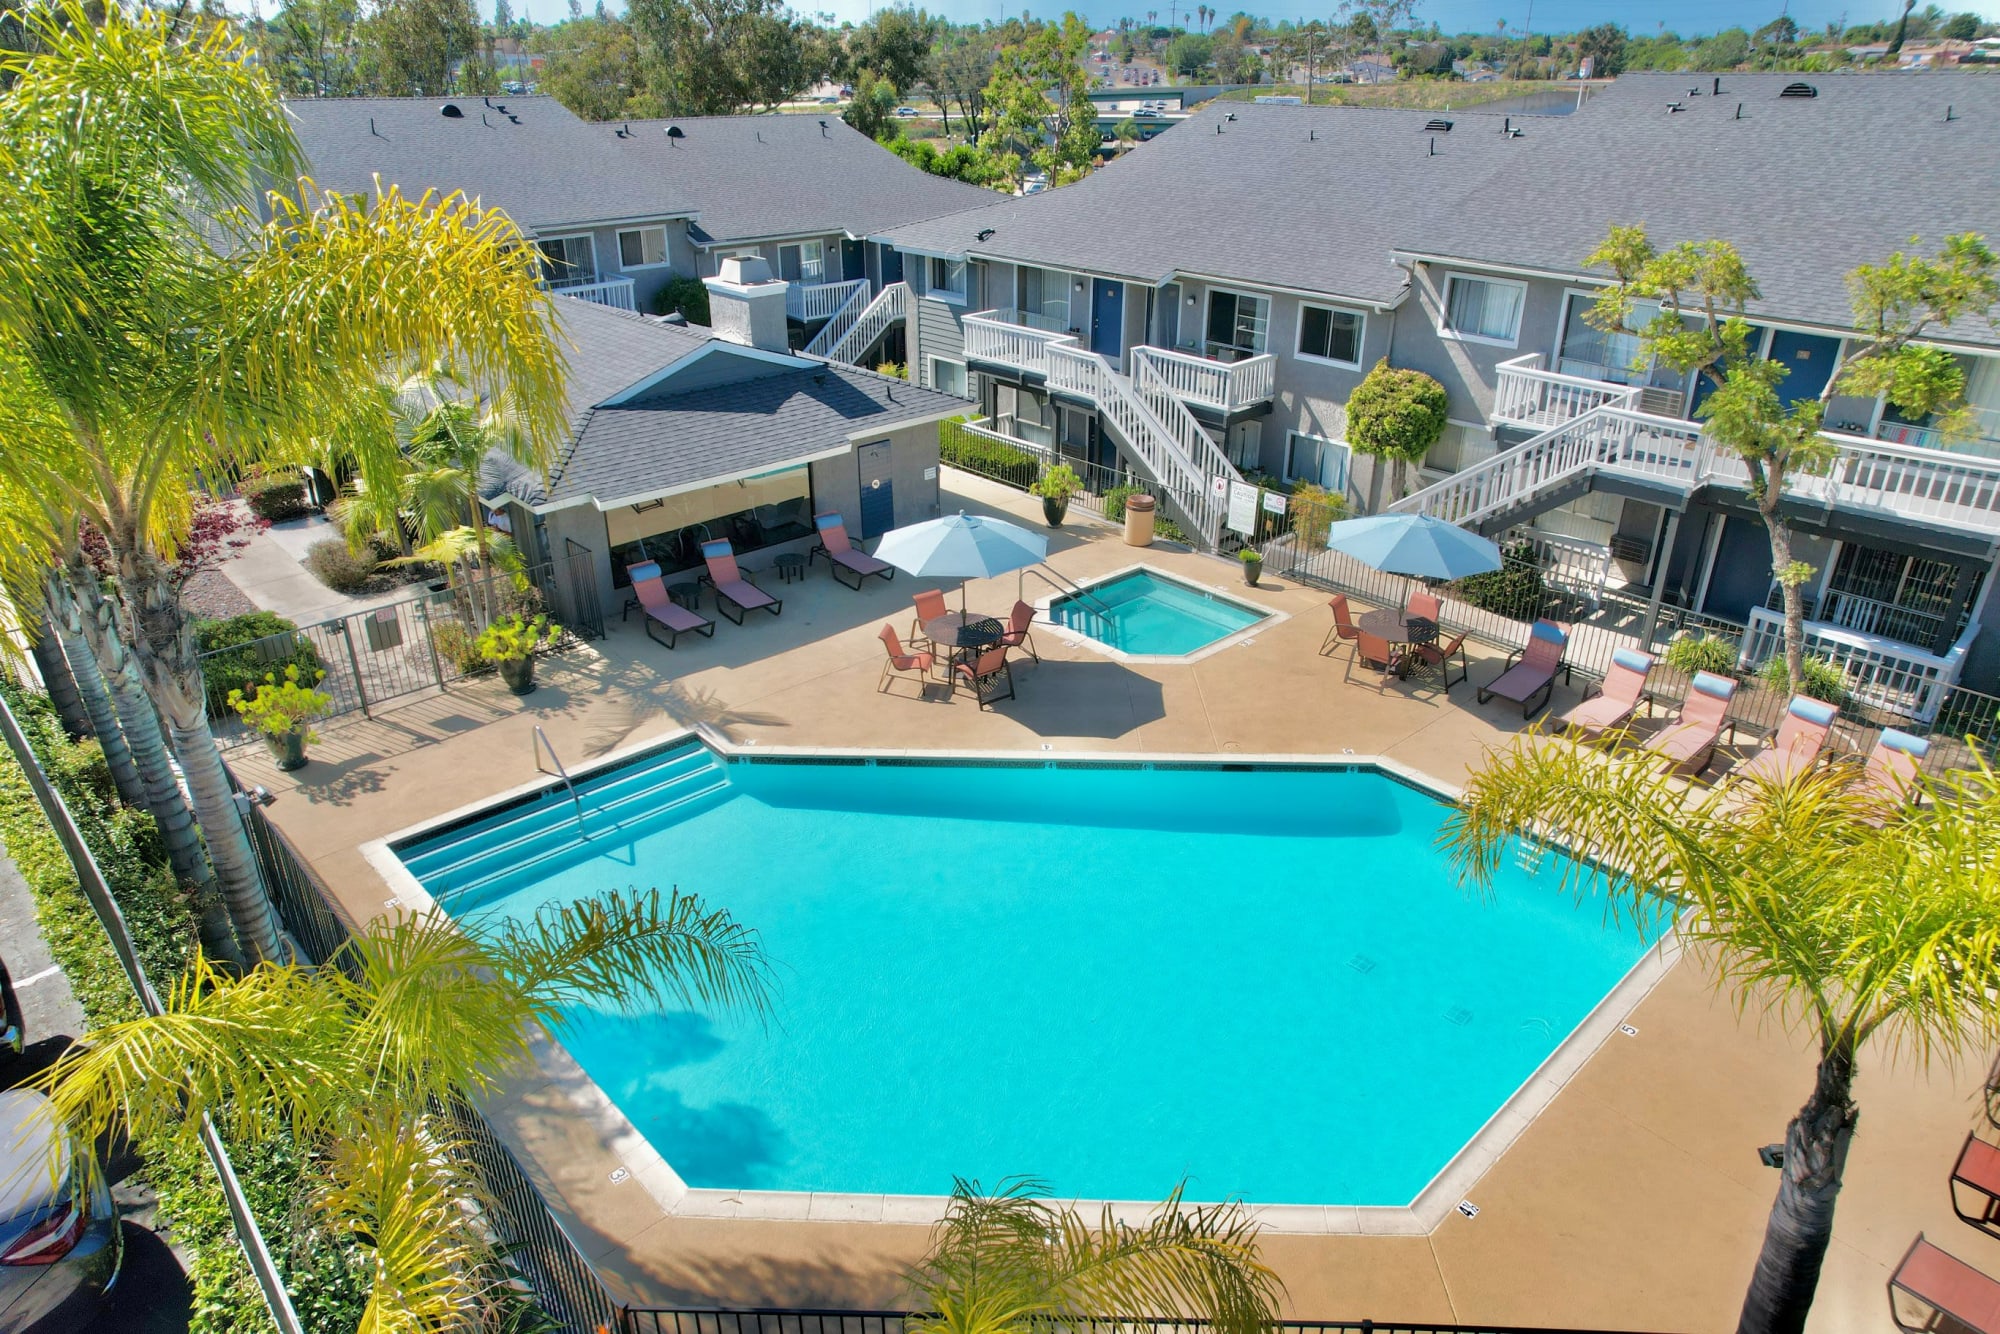 The pool and deck area at Hillside Terrace Apartments in Lemon Grove, California